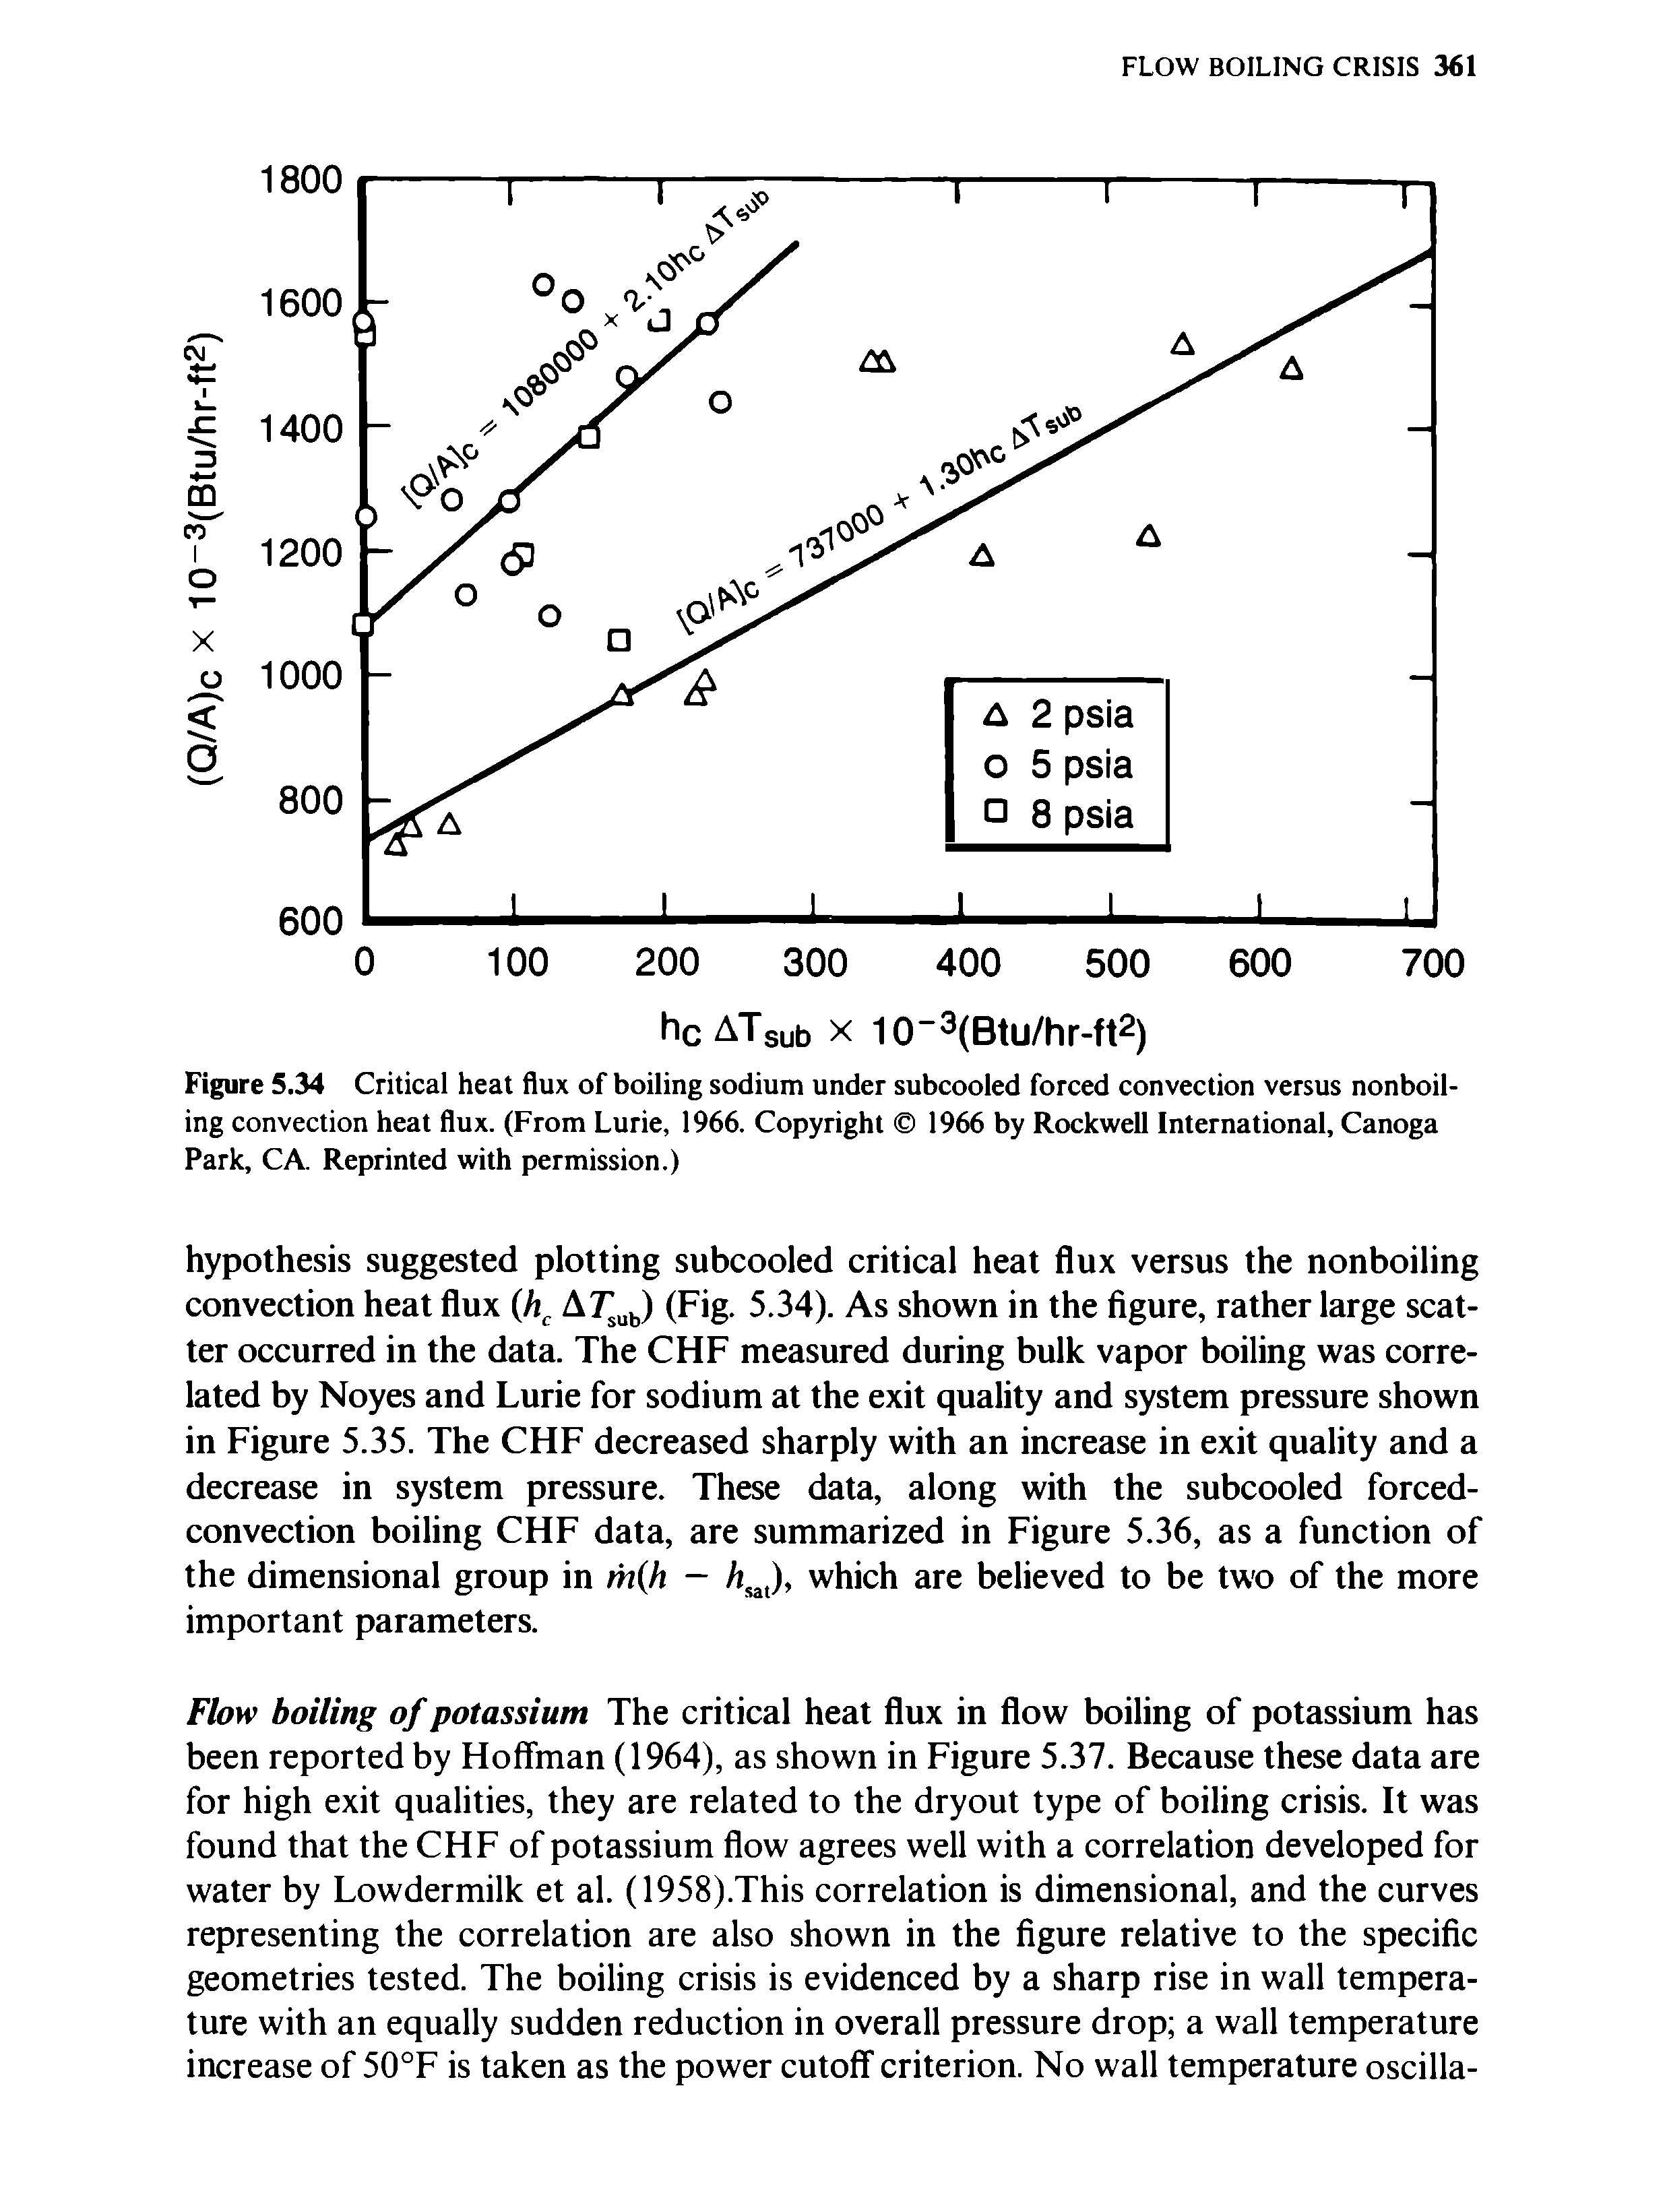 Figure 5.34 Critical heat flux of boiling sodium under subcooled forced convection versus nonboiling convection heat flux. (From Lurie, 1966. Copyright 1966 by Rockwell International, Canoga Park, CA. Reprinted with permission.)...